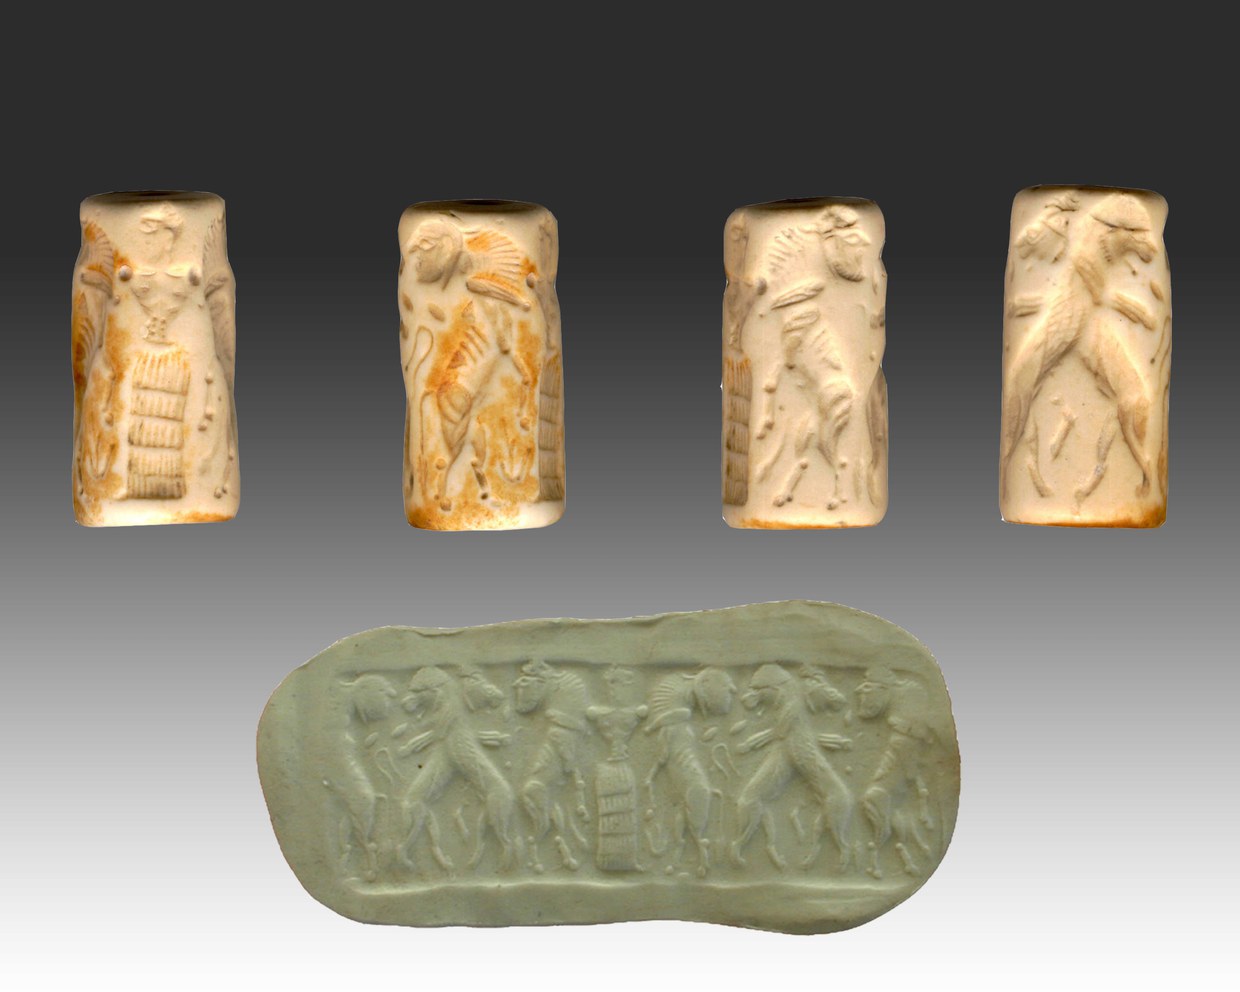 White-stone cylindrical seal, depicting a human figure defending two bull-men attacked by two lions. Local reworking of a scene, typical of Mesopotamian glyptic.